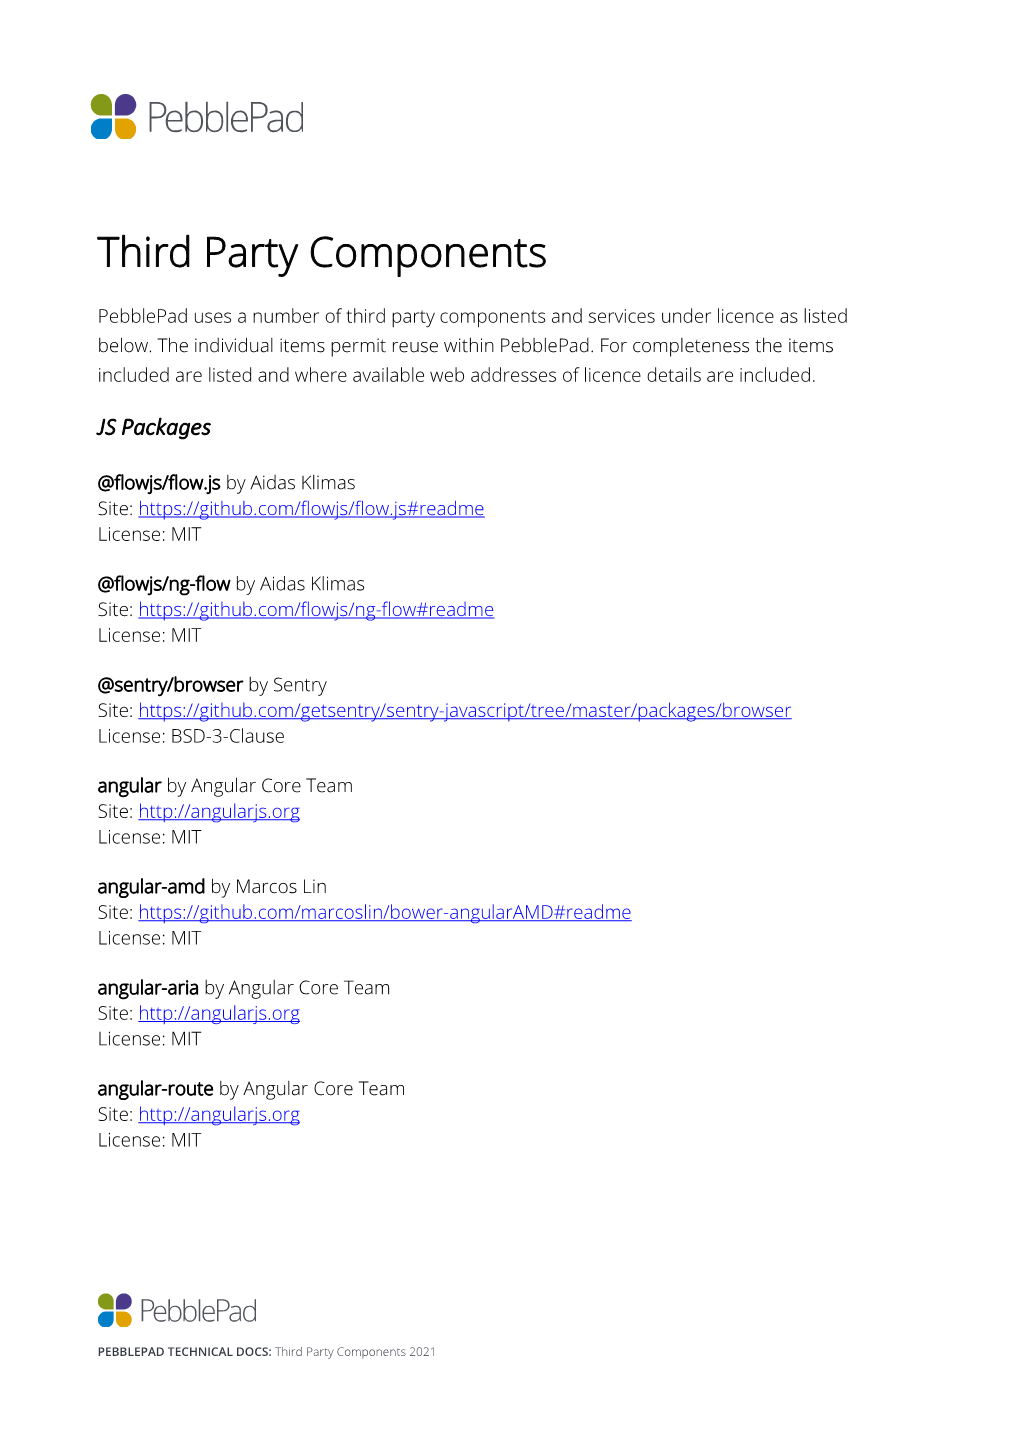 Third Party Components